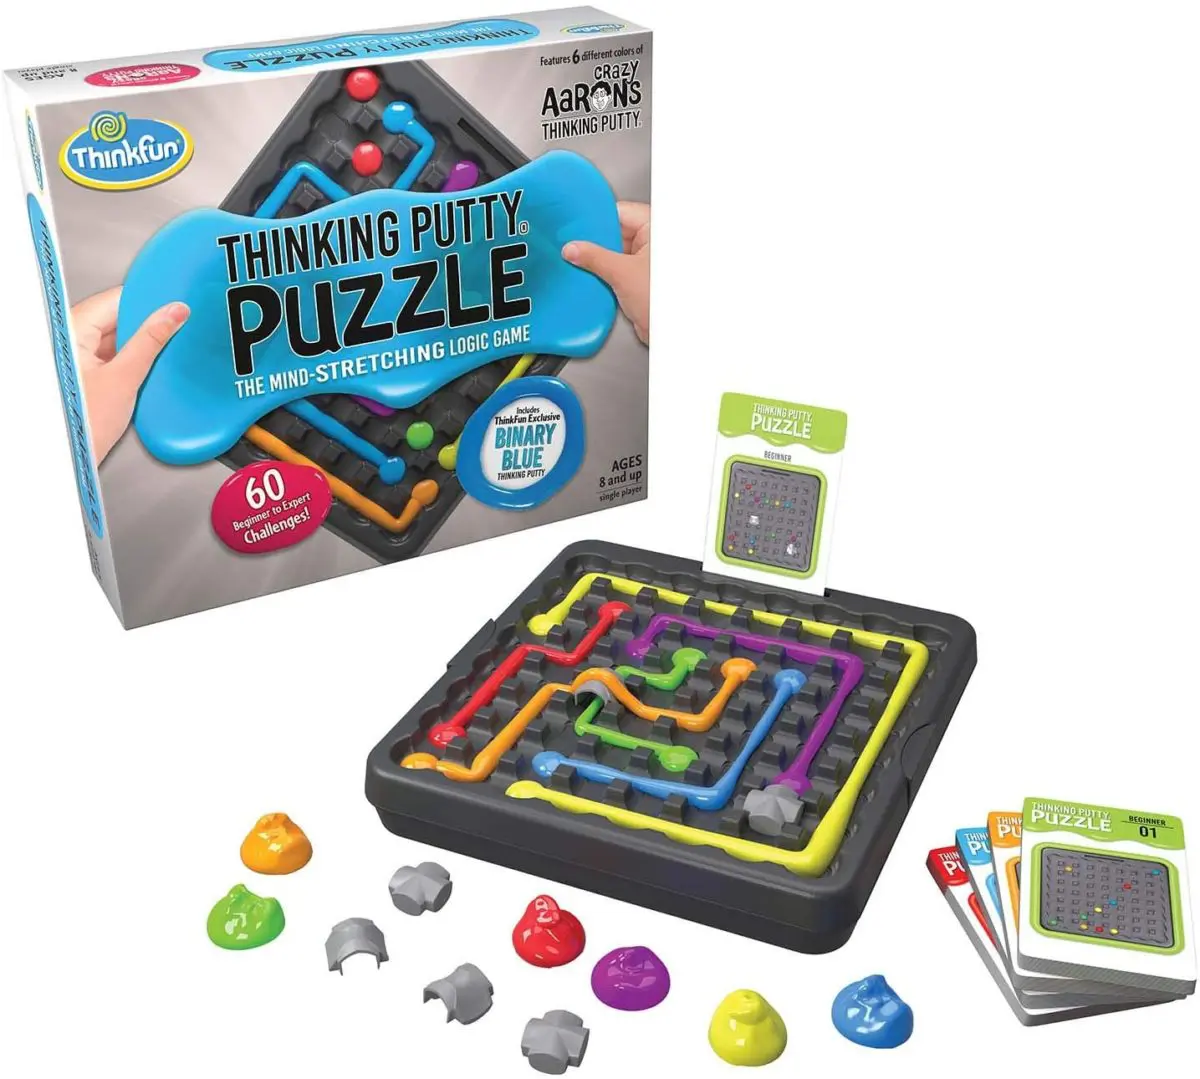 ThinkFun and Crazy Aaron’s Thinking Putty Puzzle - Top Toys and Gifts for Ten Year Old Boys 1